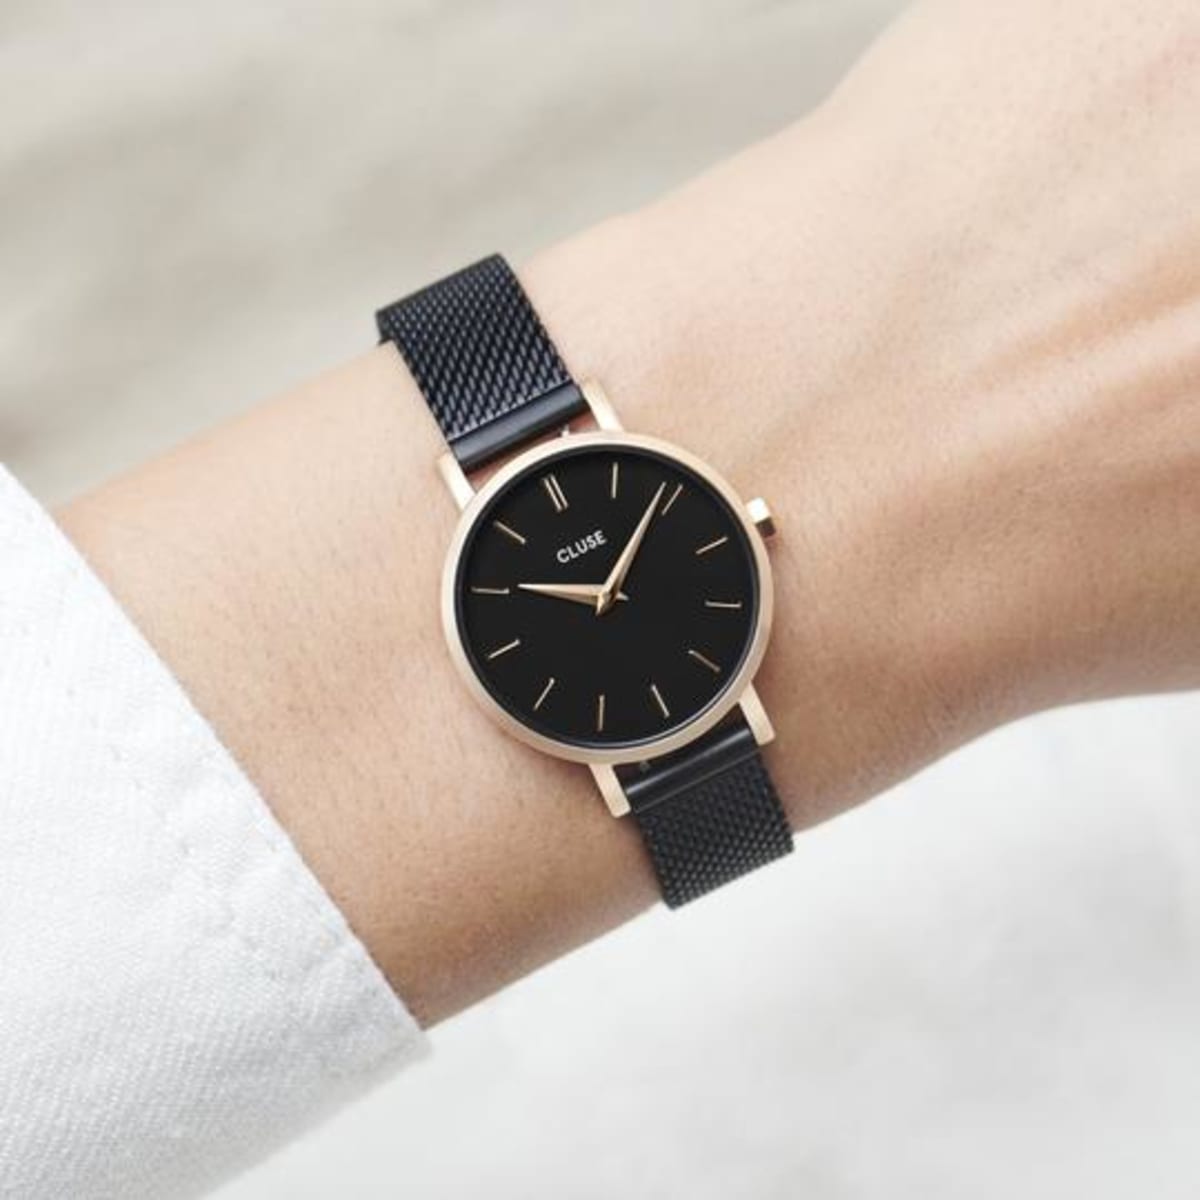 Small size, big dreams. With its refined 28 mm case, our Boho Chic Petite collection is your perfect companion if you prefer a smaller, understated timepiece. Featuring a matte black dial, rose gold case & black mesh strap, you'll always be on-trend with this bestselling colour combination. A watch built to last thanks to its stainless steel case and mesh strap.